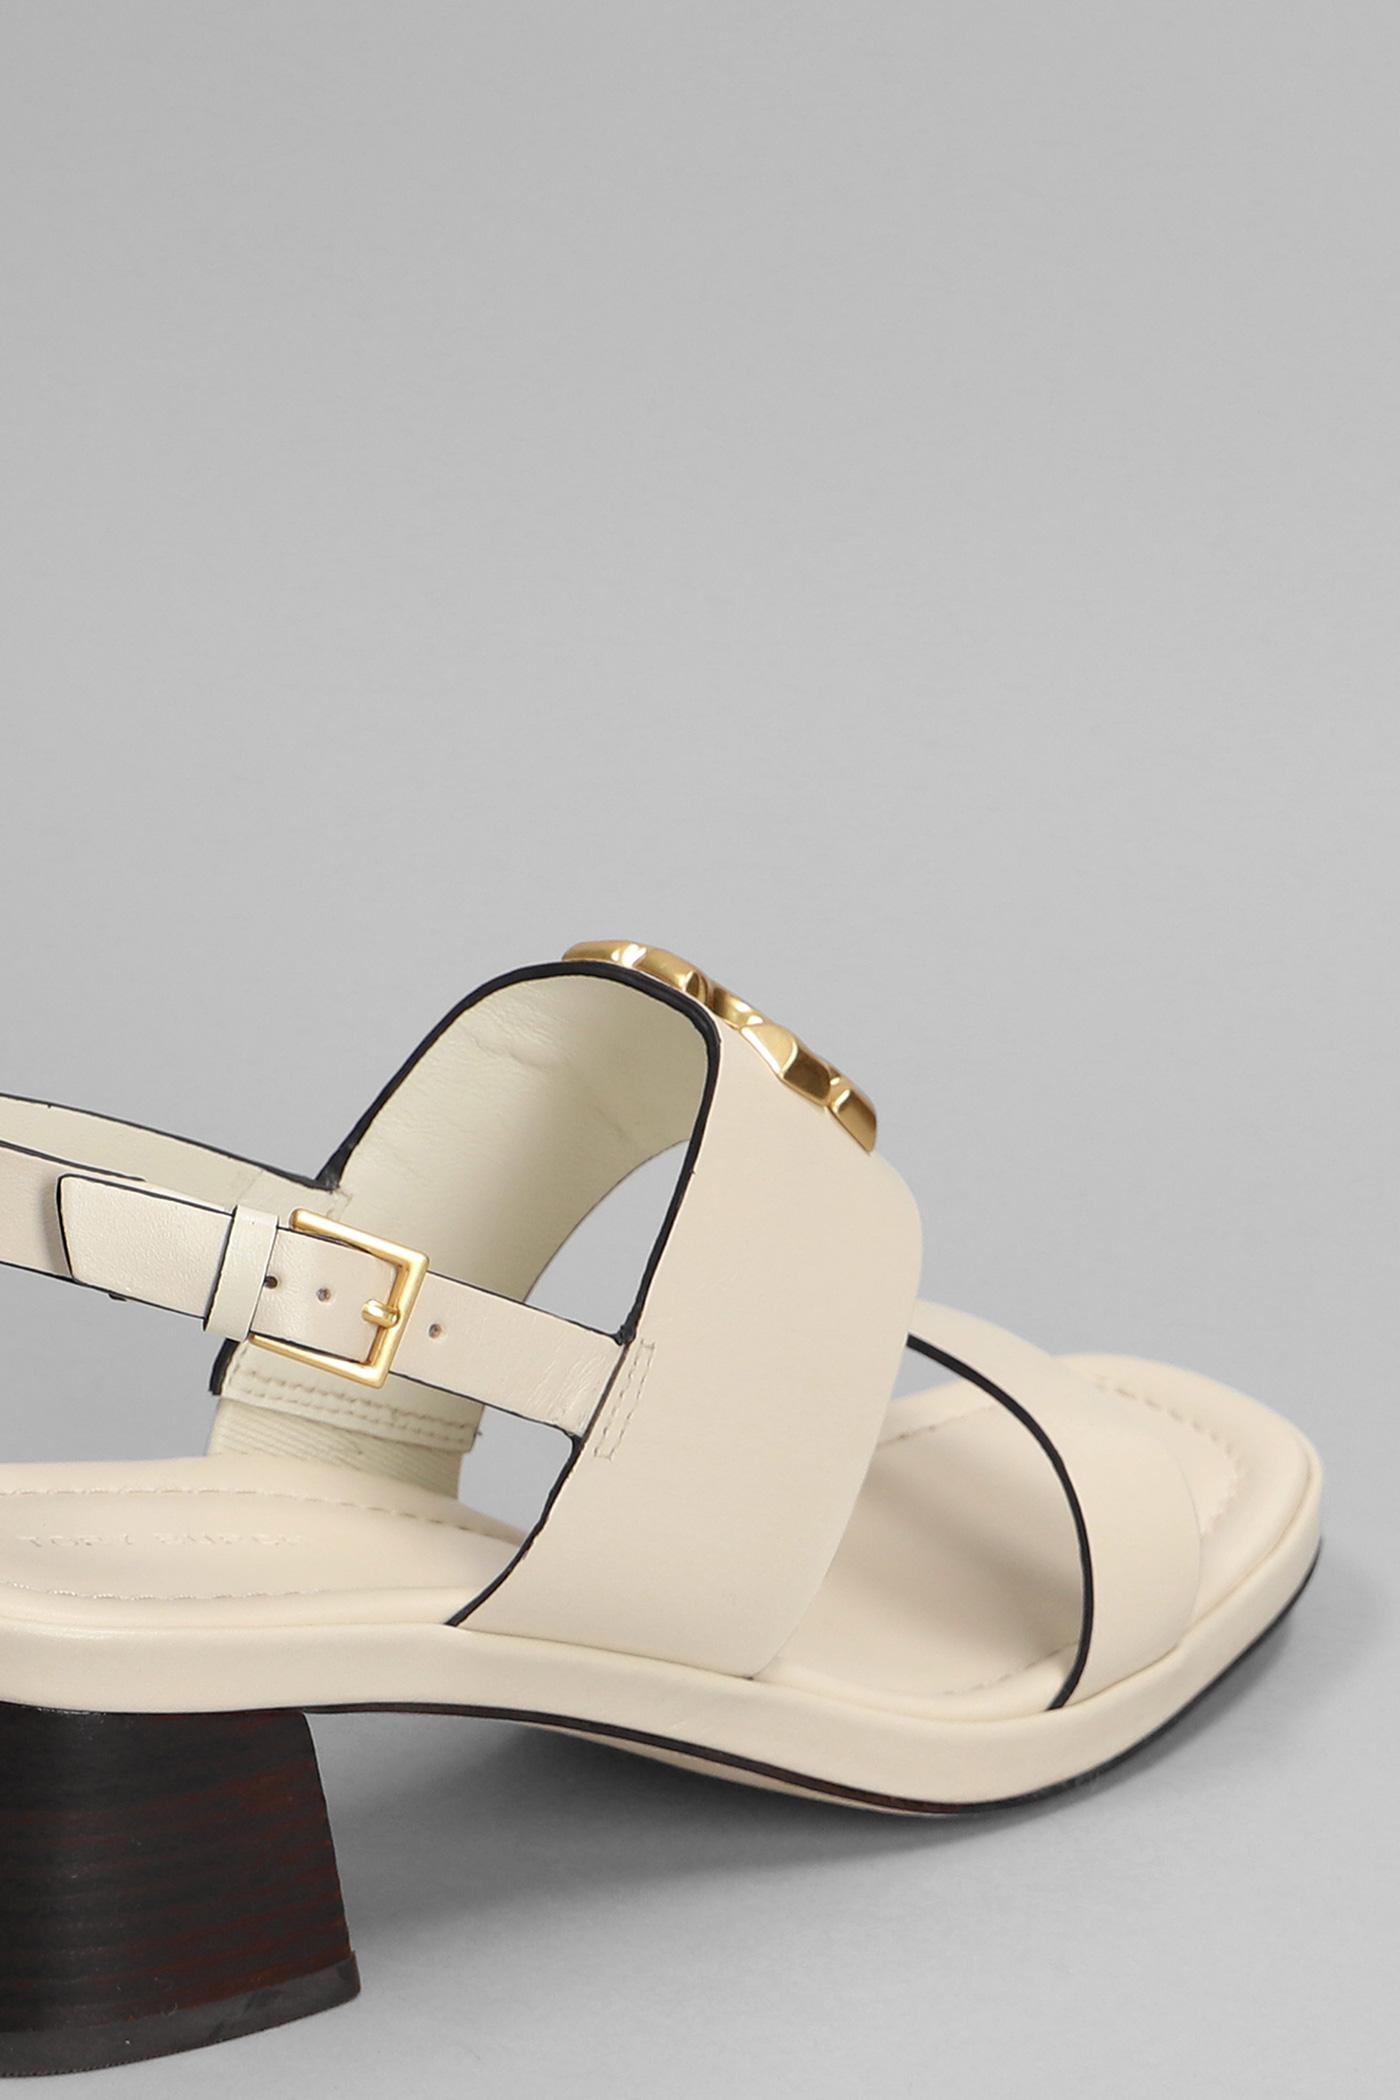 Tory Burch Sandals In Beige Leather in White | Lyst